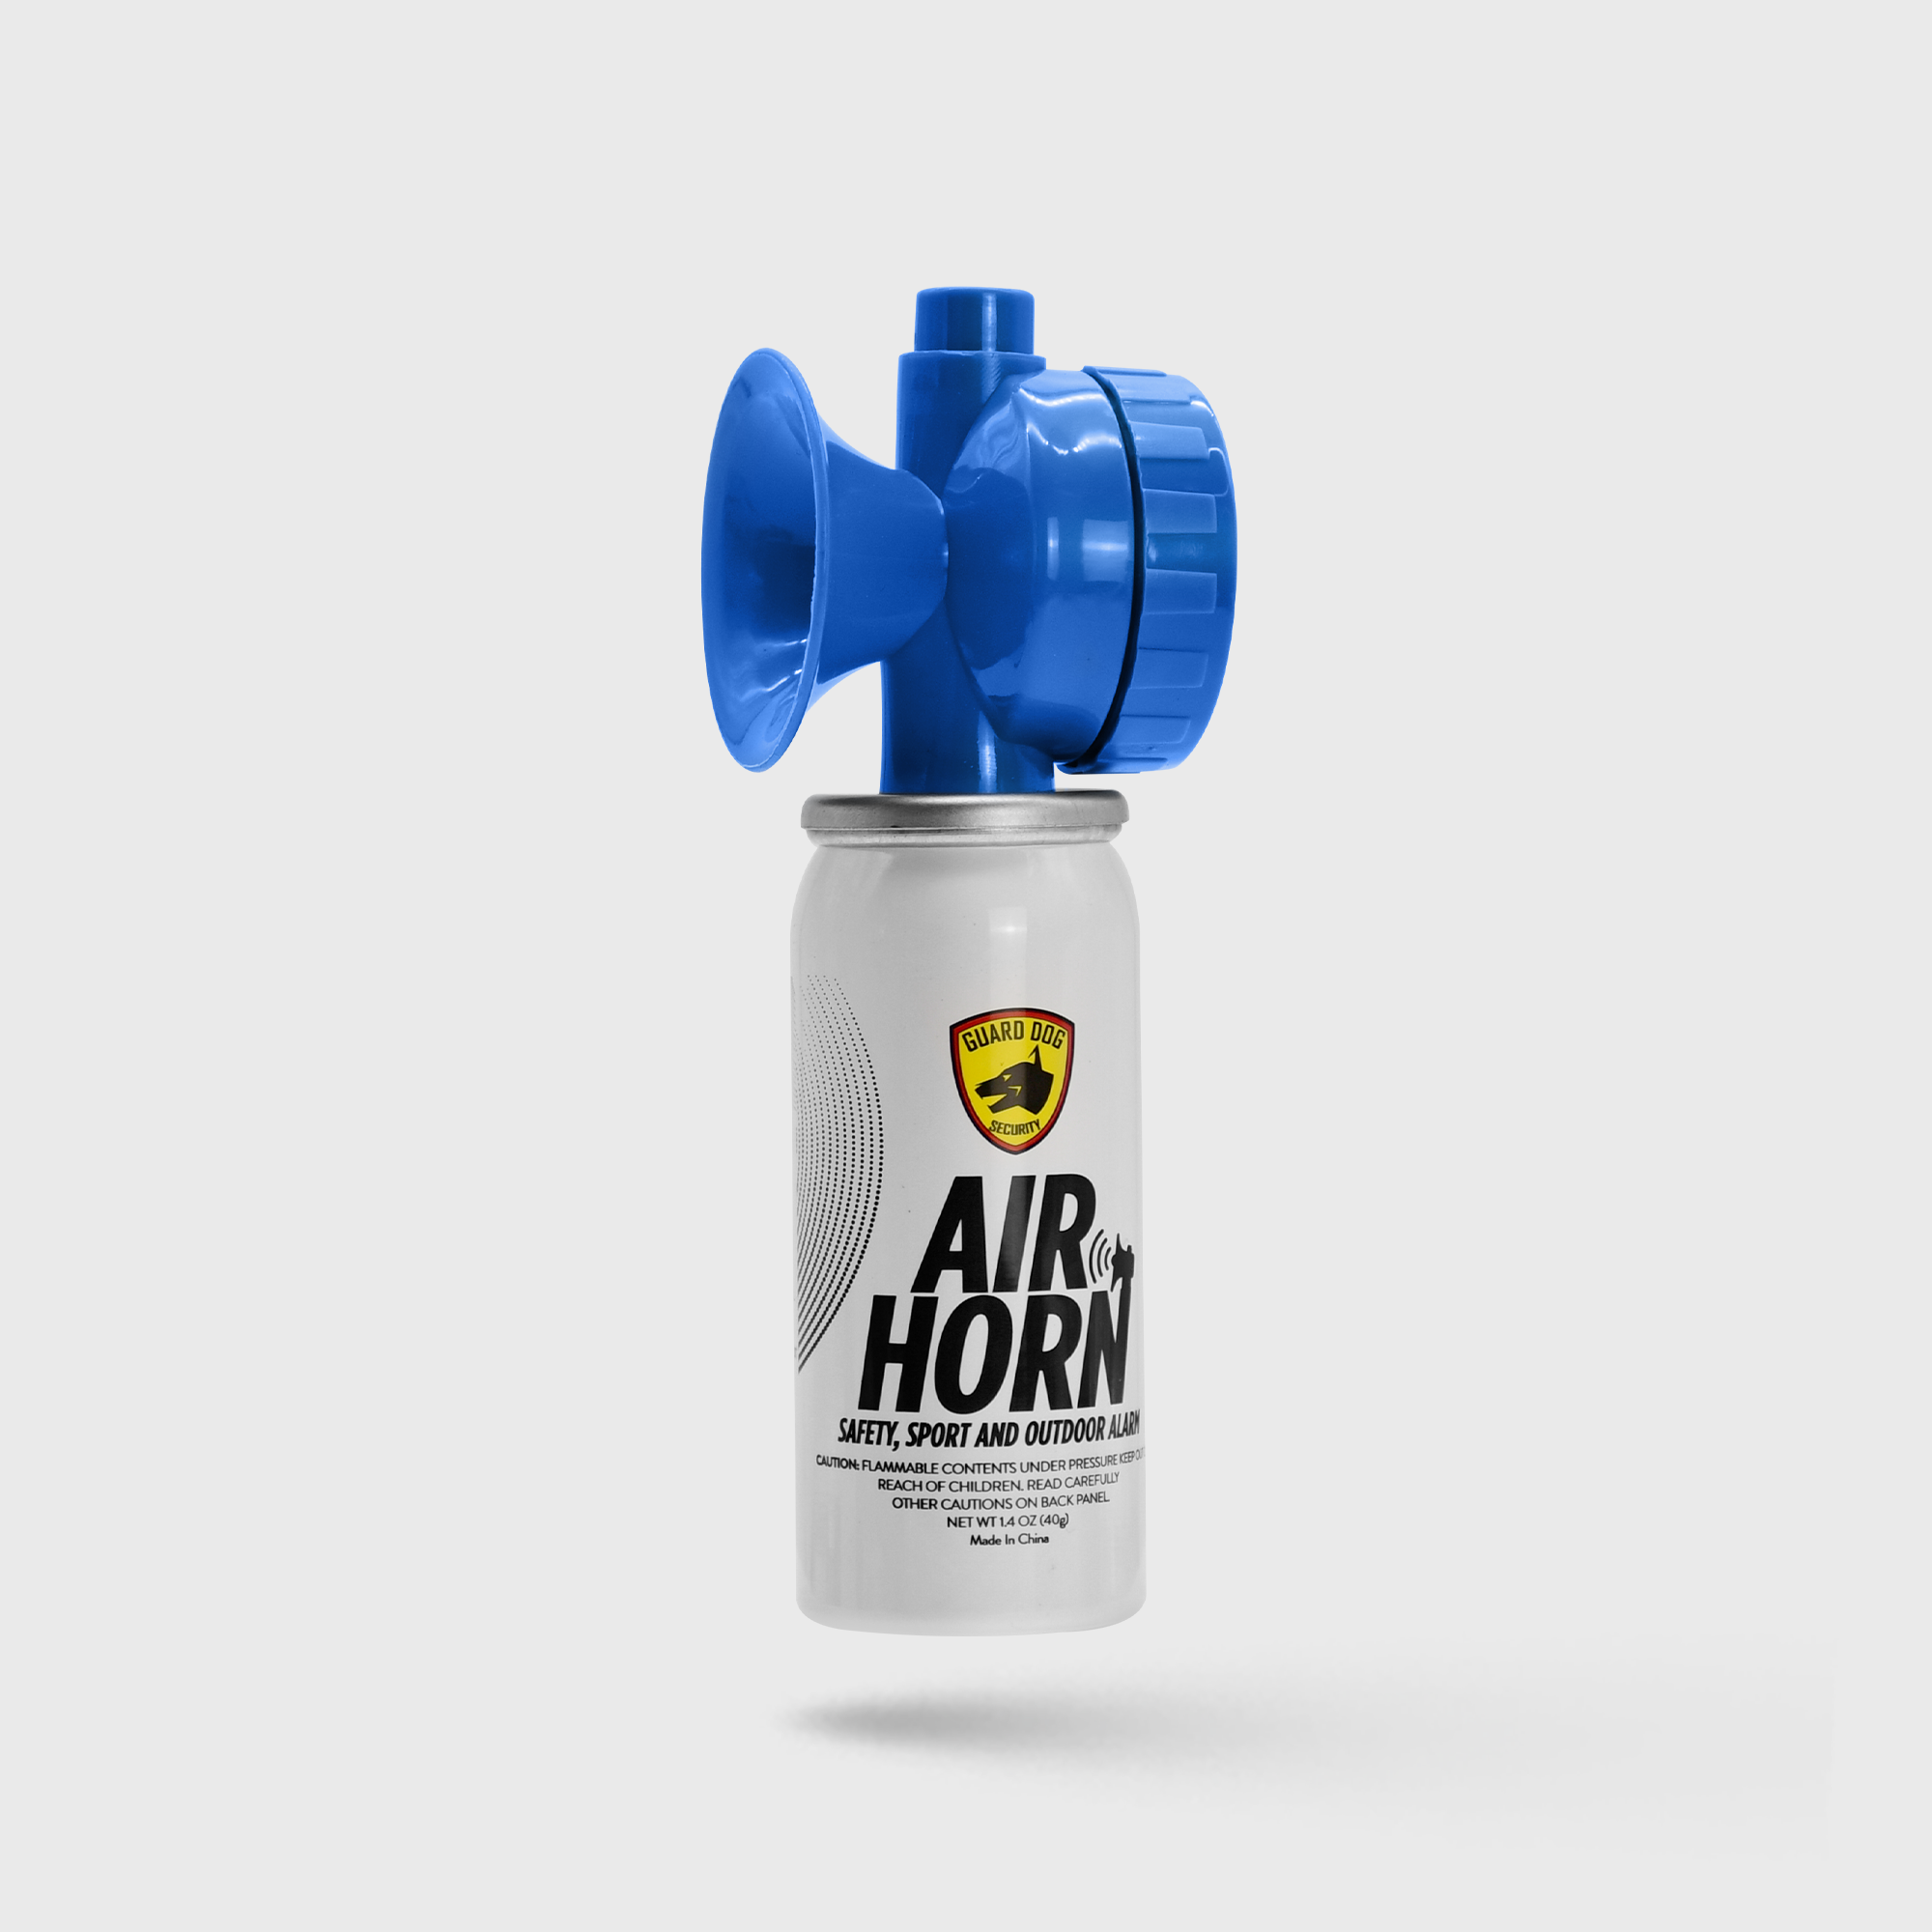 Buy Air Horn 1.4 oz online, 1-mile away safety and Outdoor Alarm